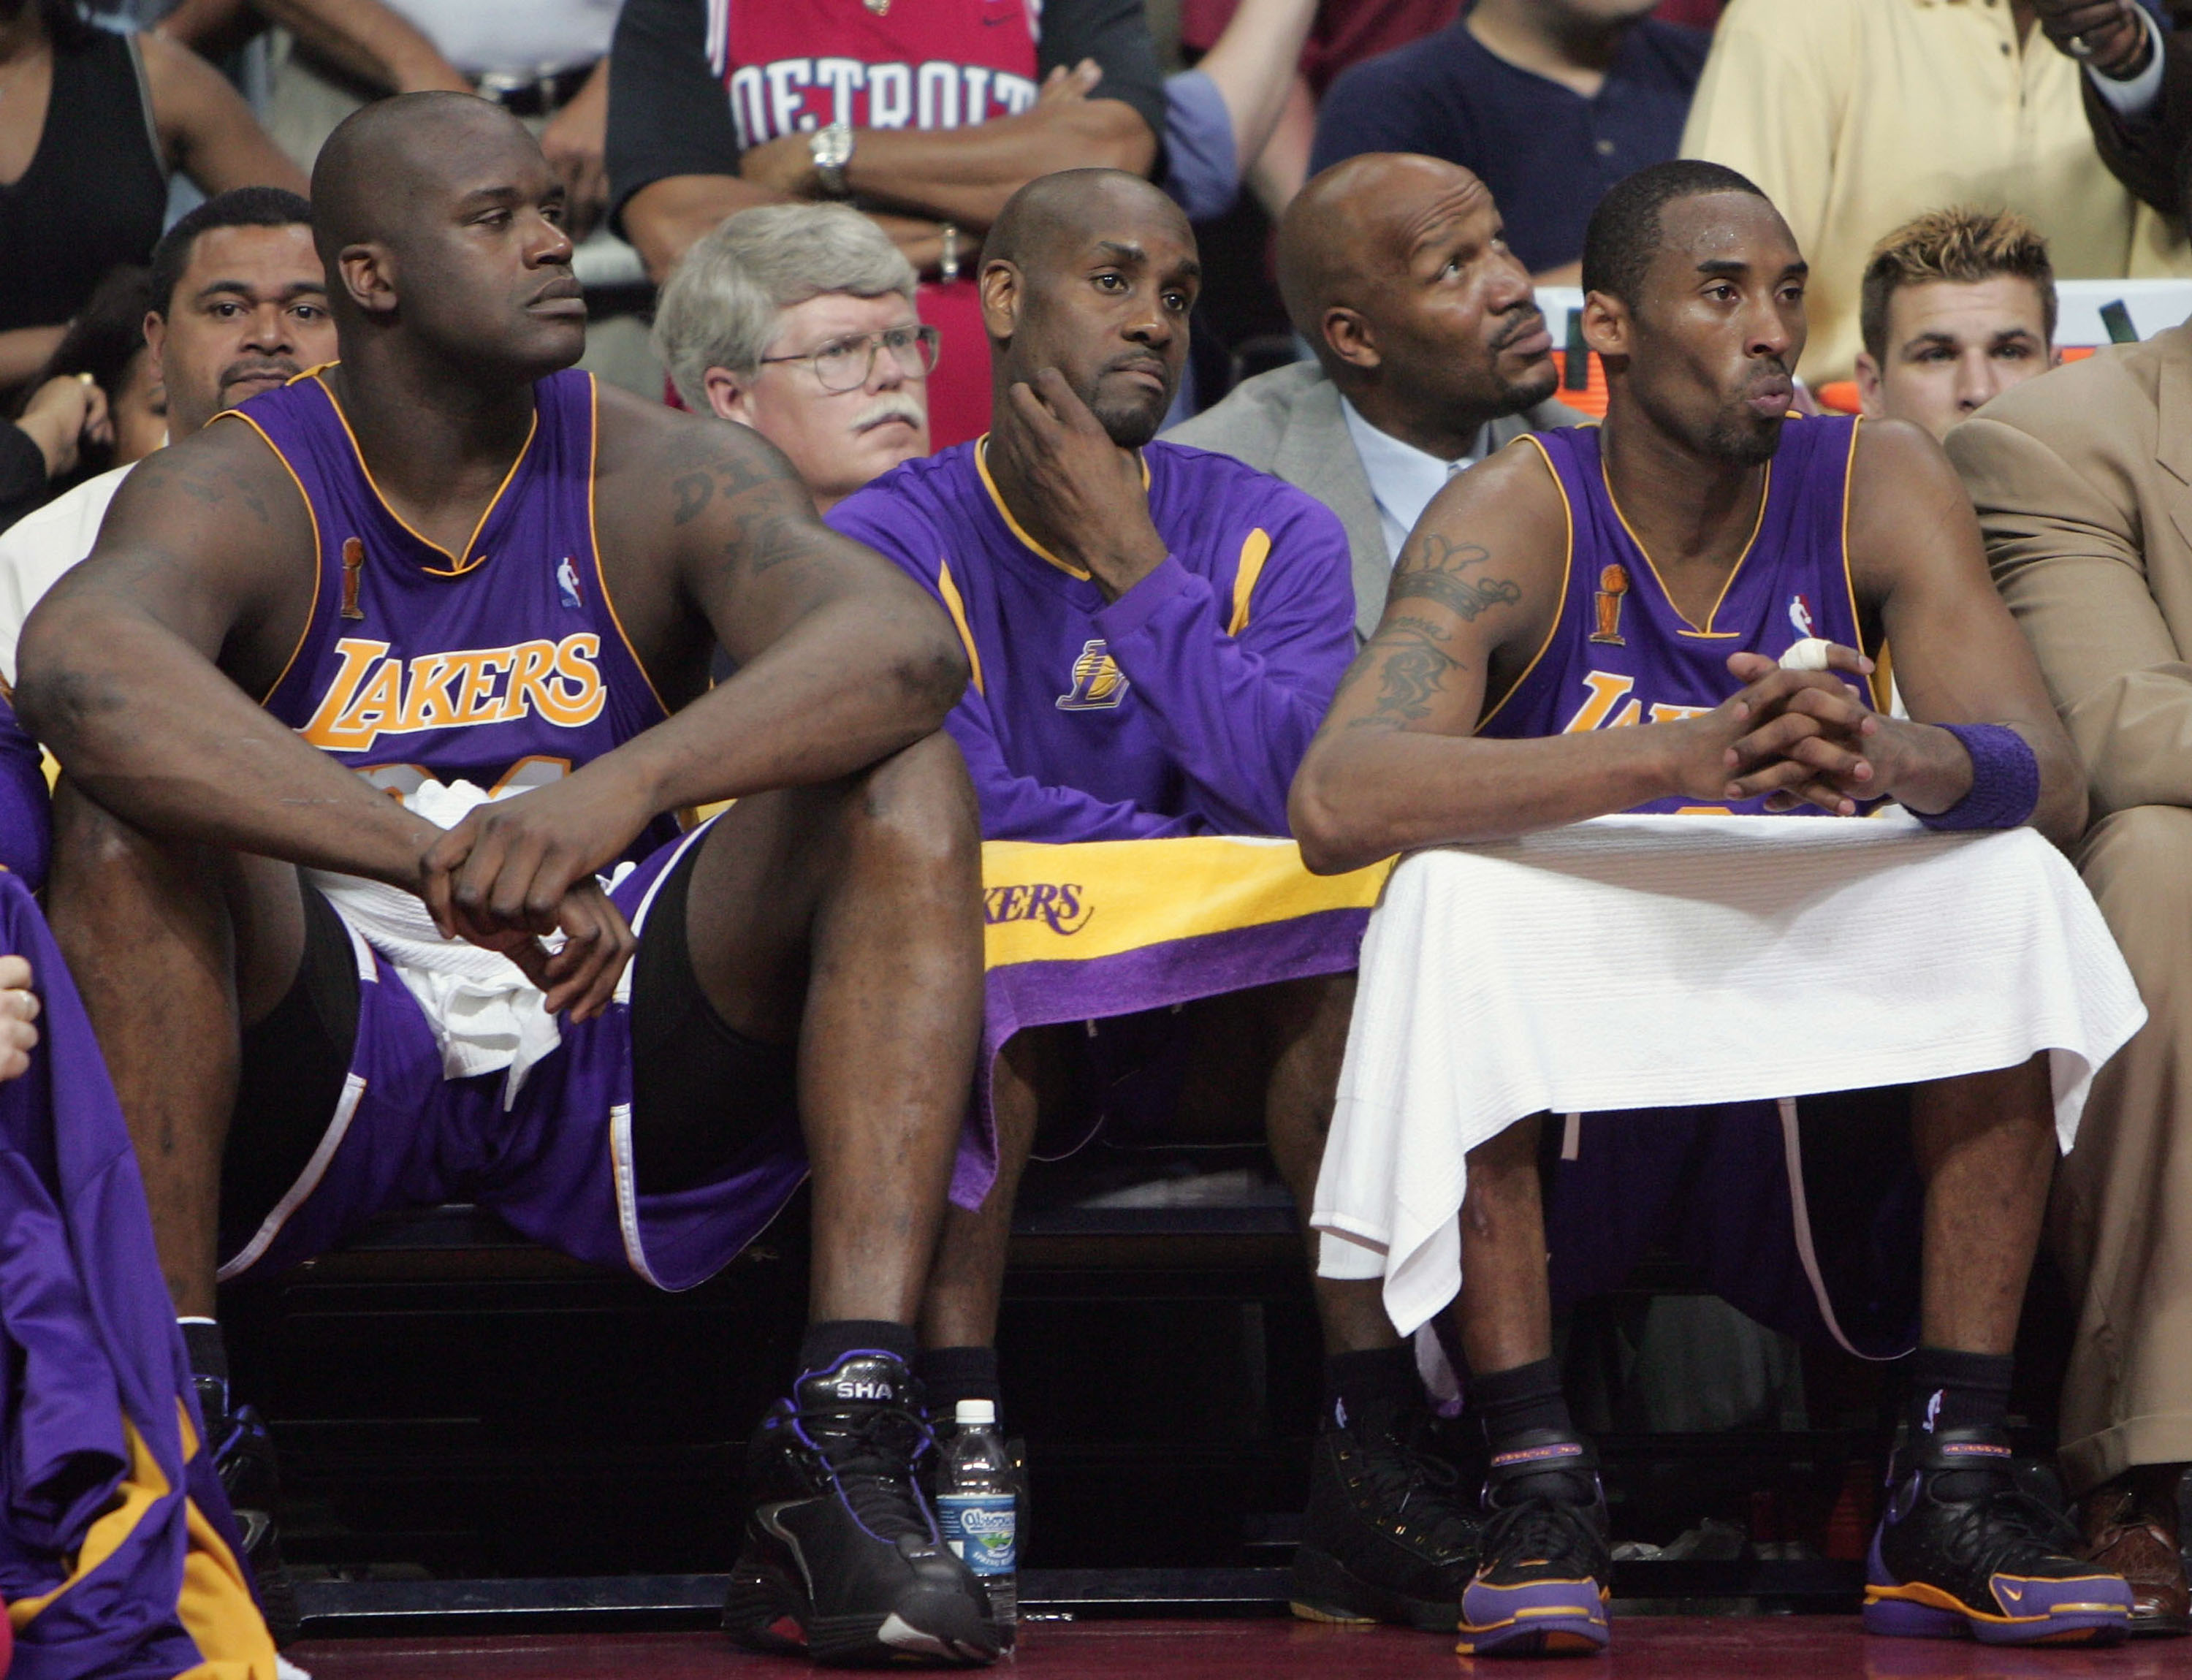 Lakers' Kobe Bryant modeled his footwork partly after former